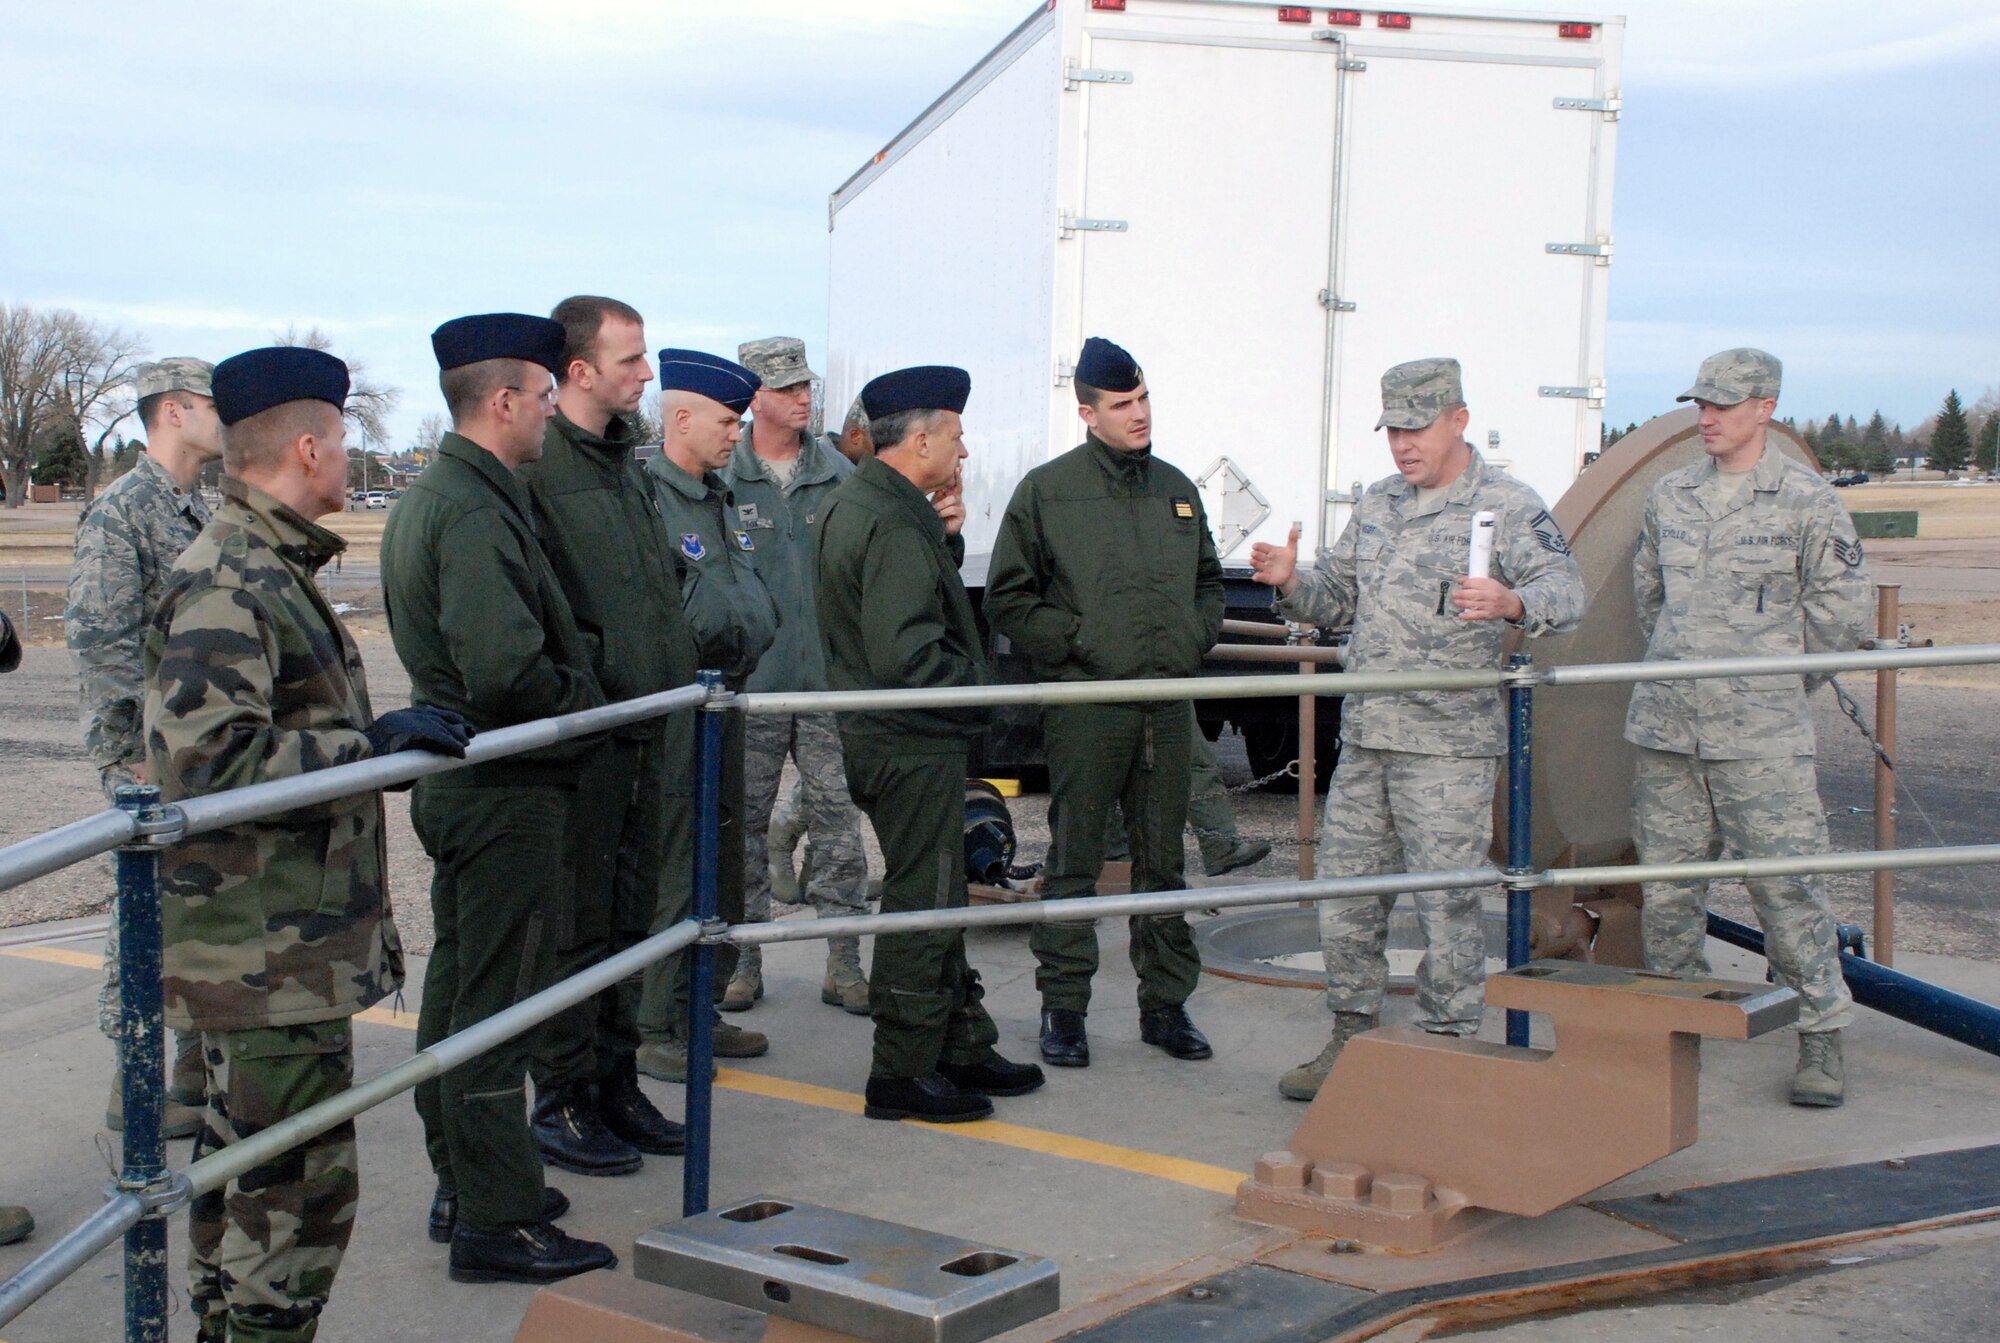 Members of the French Strategic Air Forces listen to a briefing covering missile maintenance at a mock launch facility complex during a visit to F. E. Warren Air Force Base Nov. 18 through 20. (U.S. Air Force photo by 1st Lt. Brooke Brzozowske)